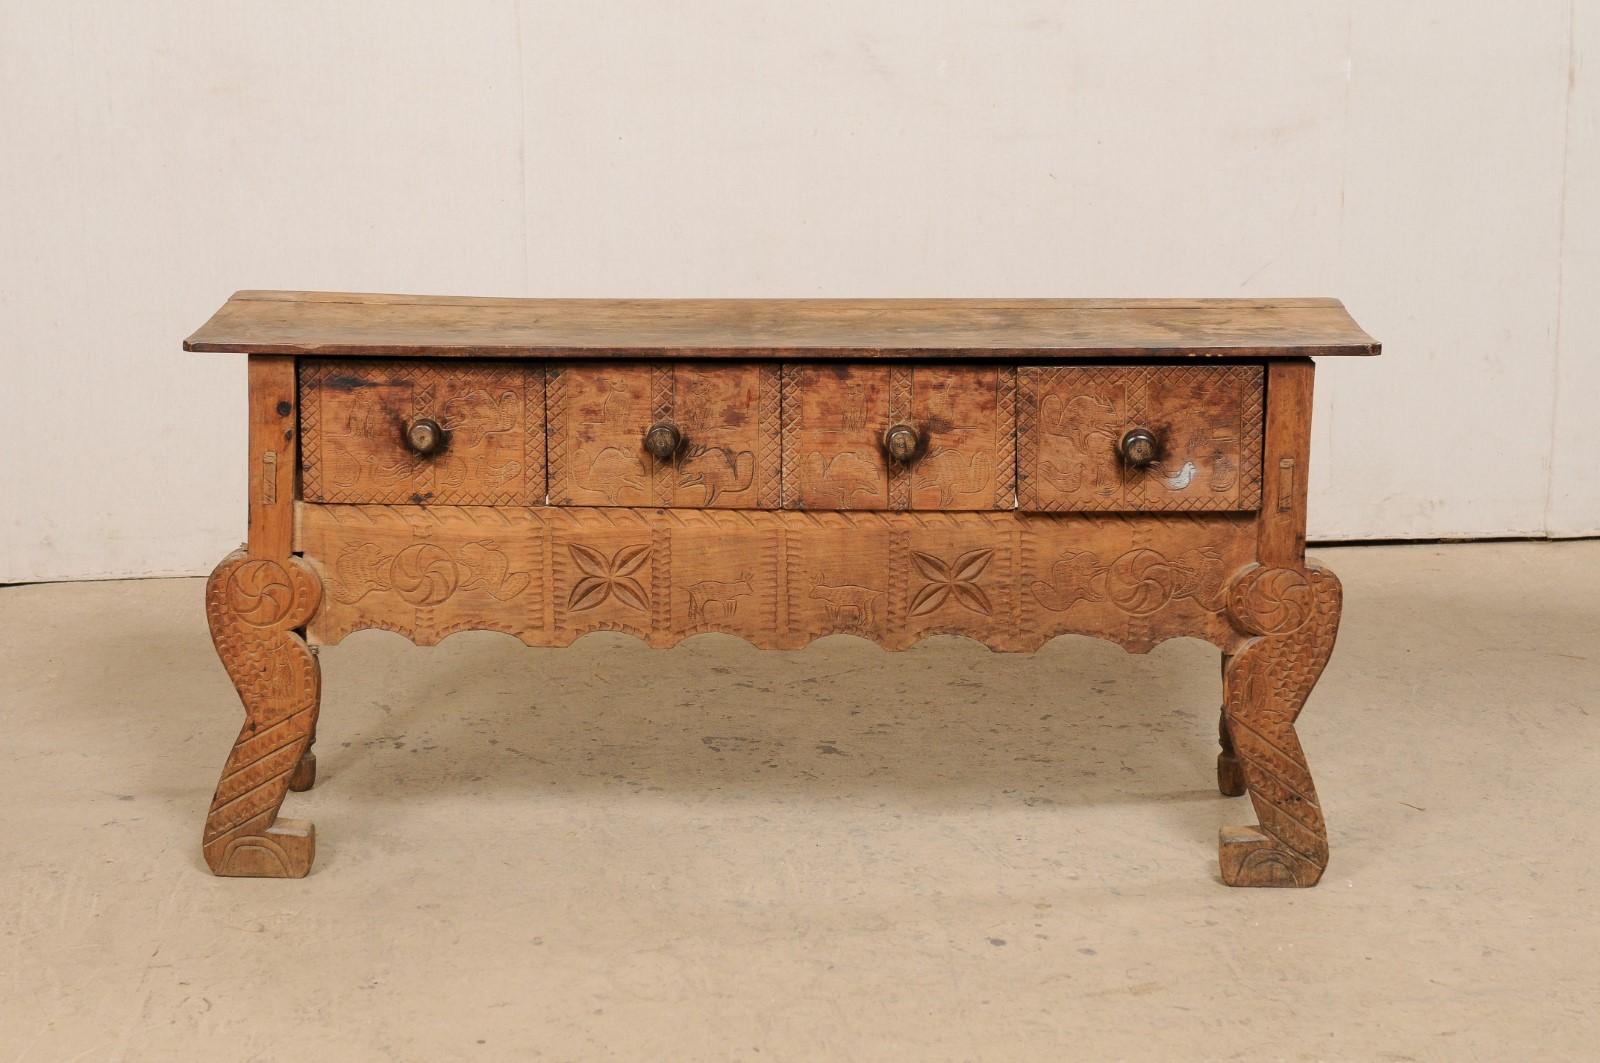 Antique Spanish Colonial Console w/Drawers, Adorn in Primitive-Style Carvings 5